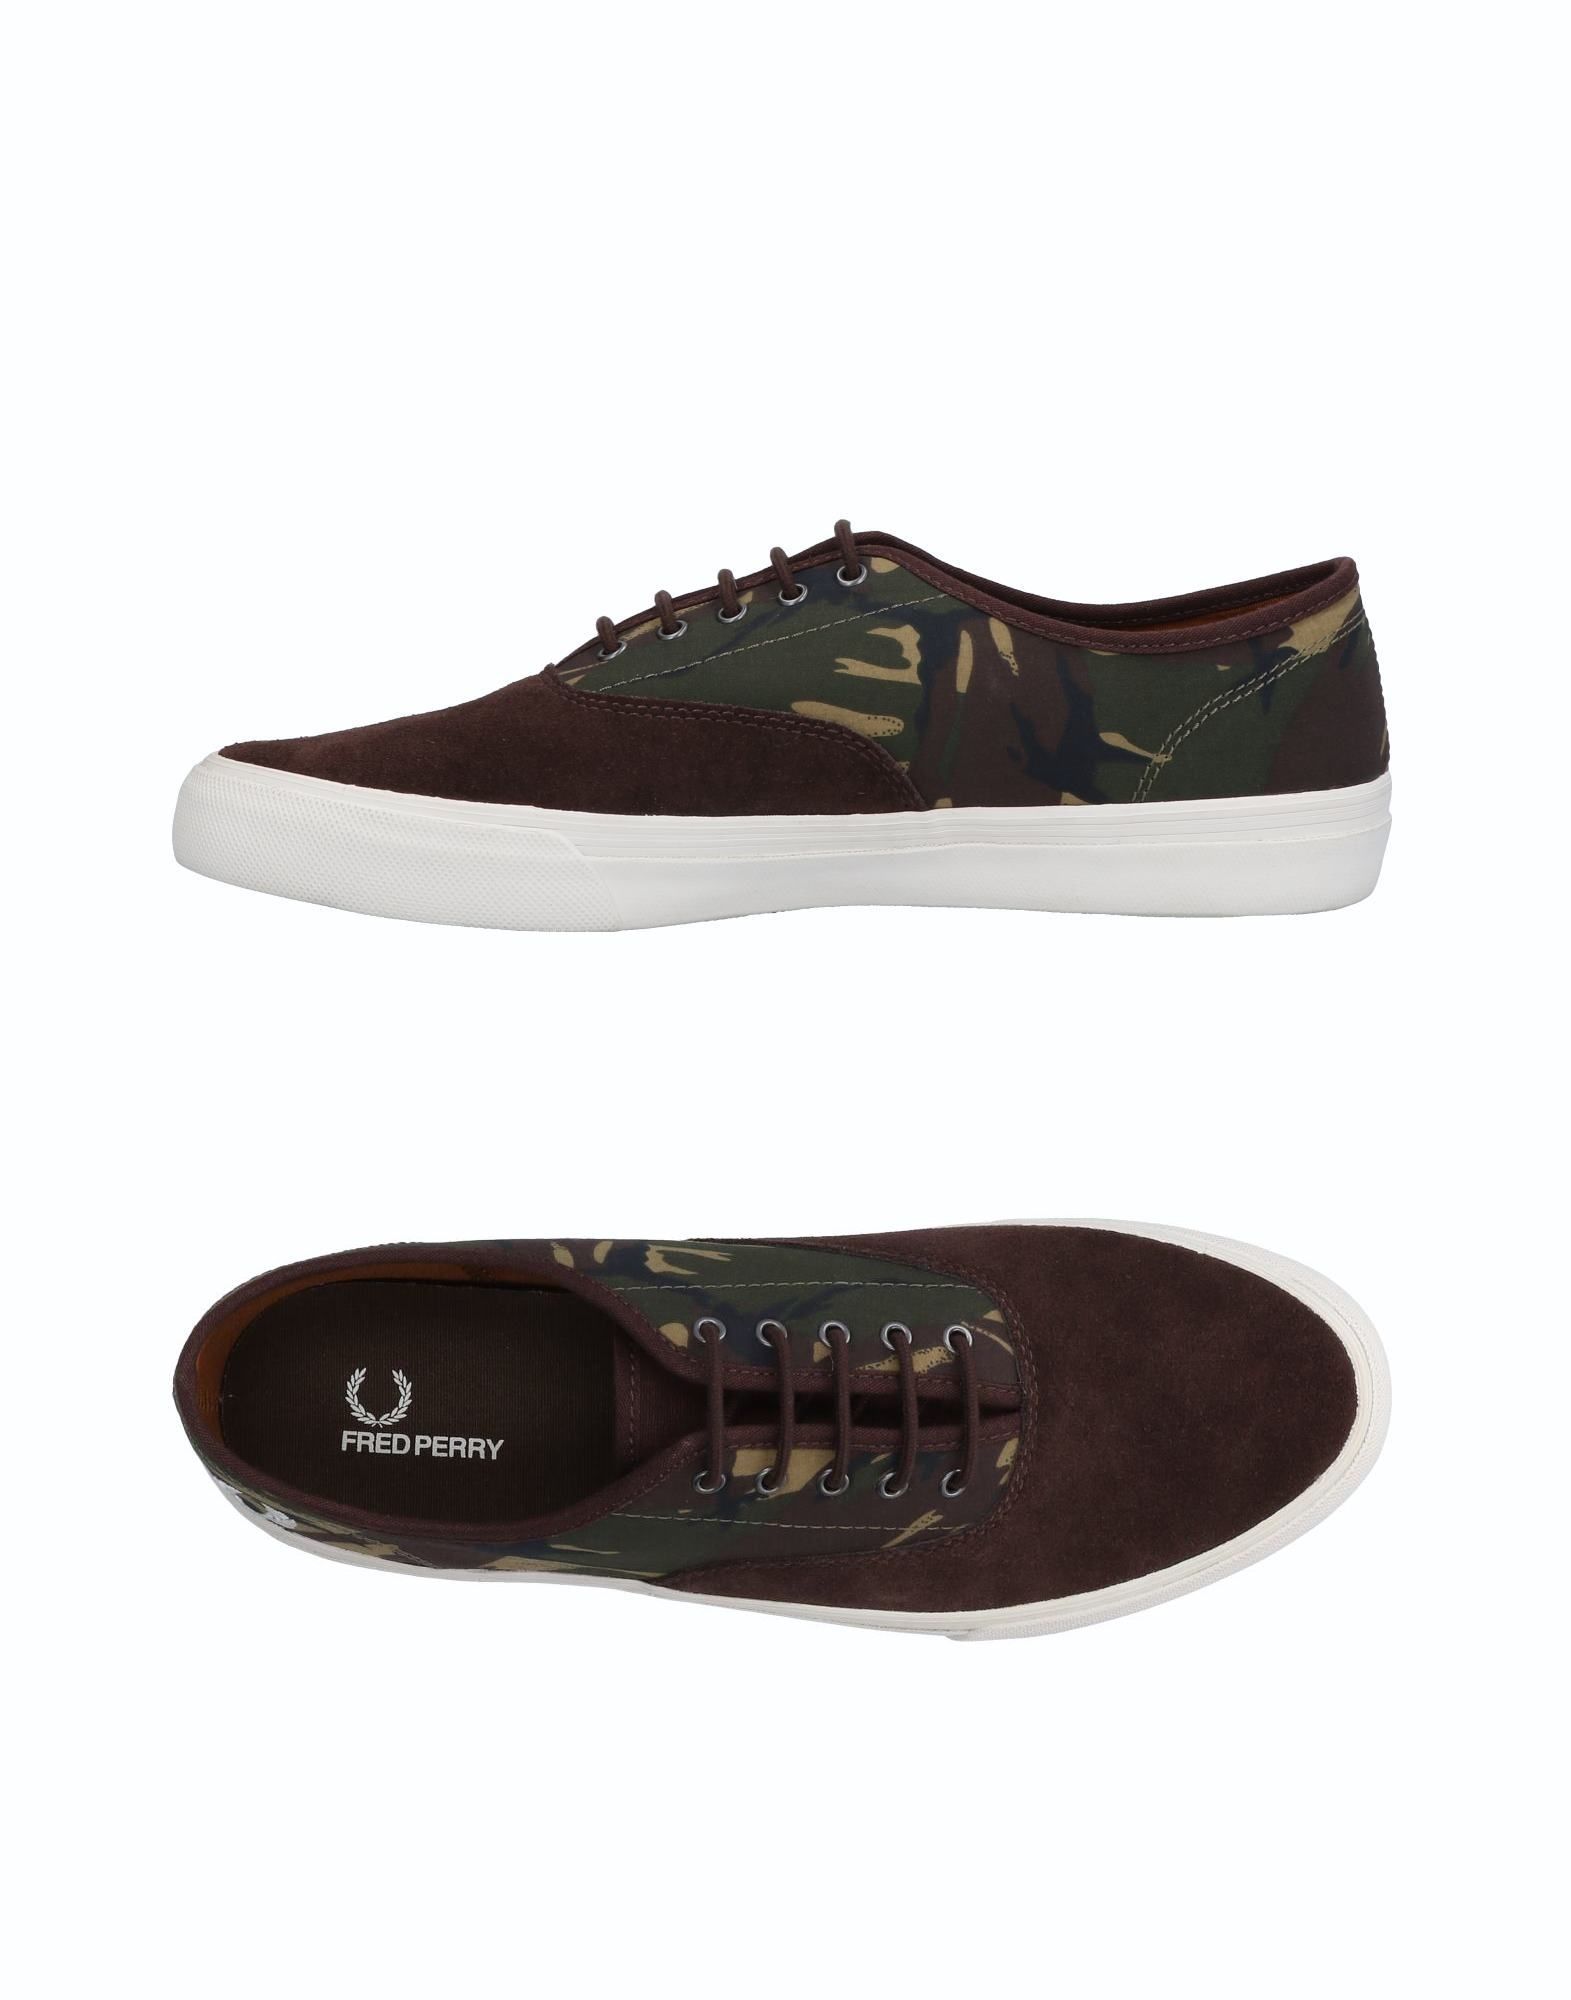 FRED PERRY Sneakers,11503724II 7